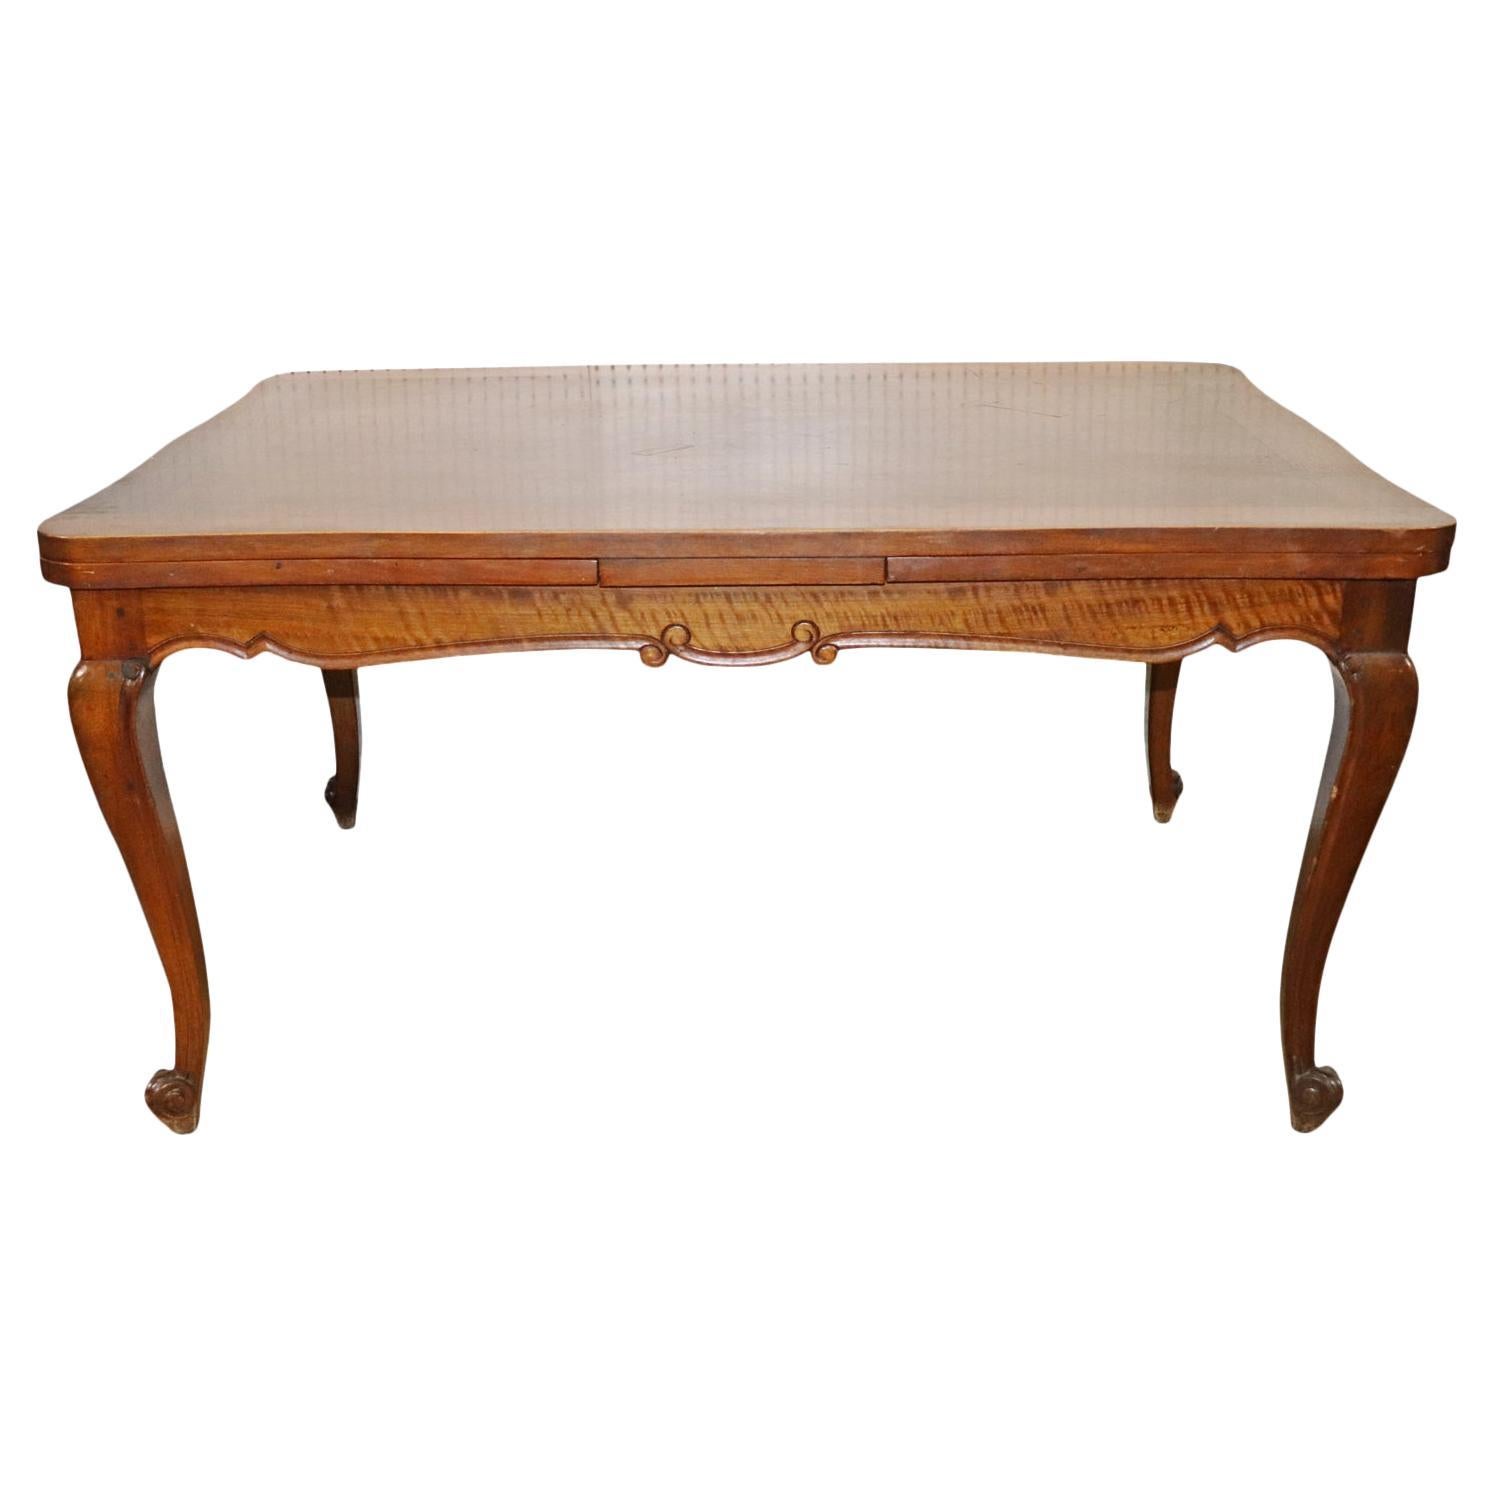 Solid Walnut Parquetry Inlaid French Louis XV Refractory Dining Table